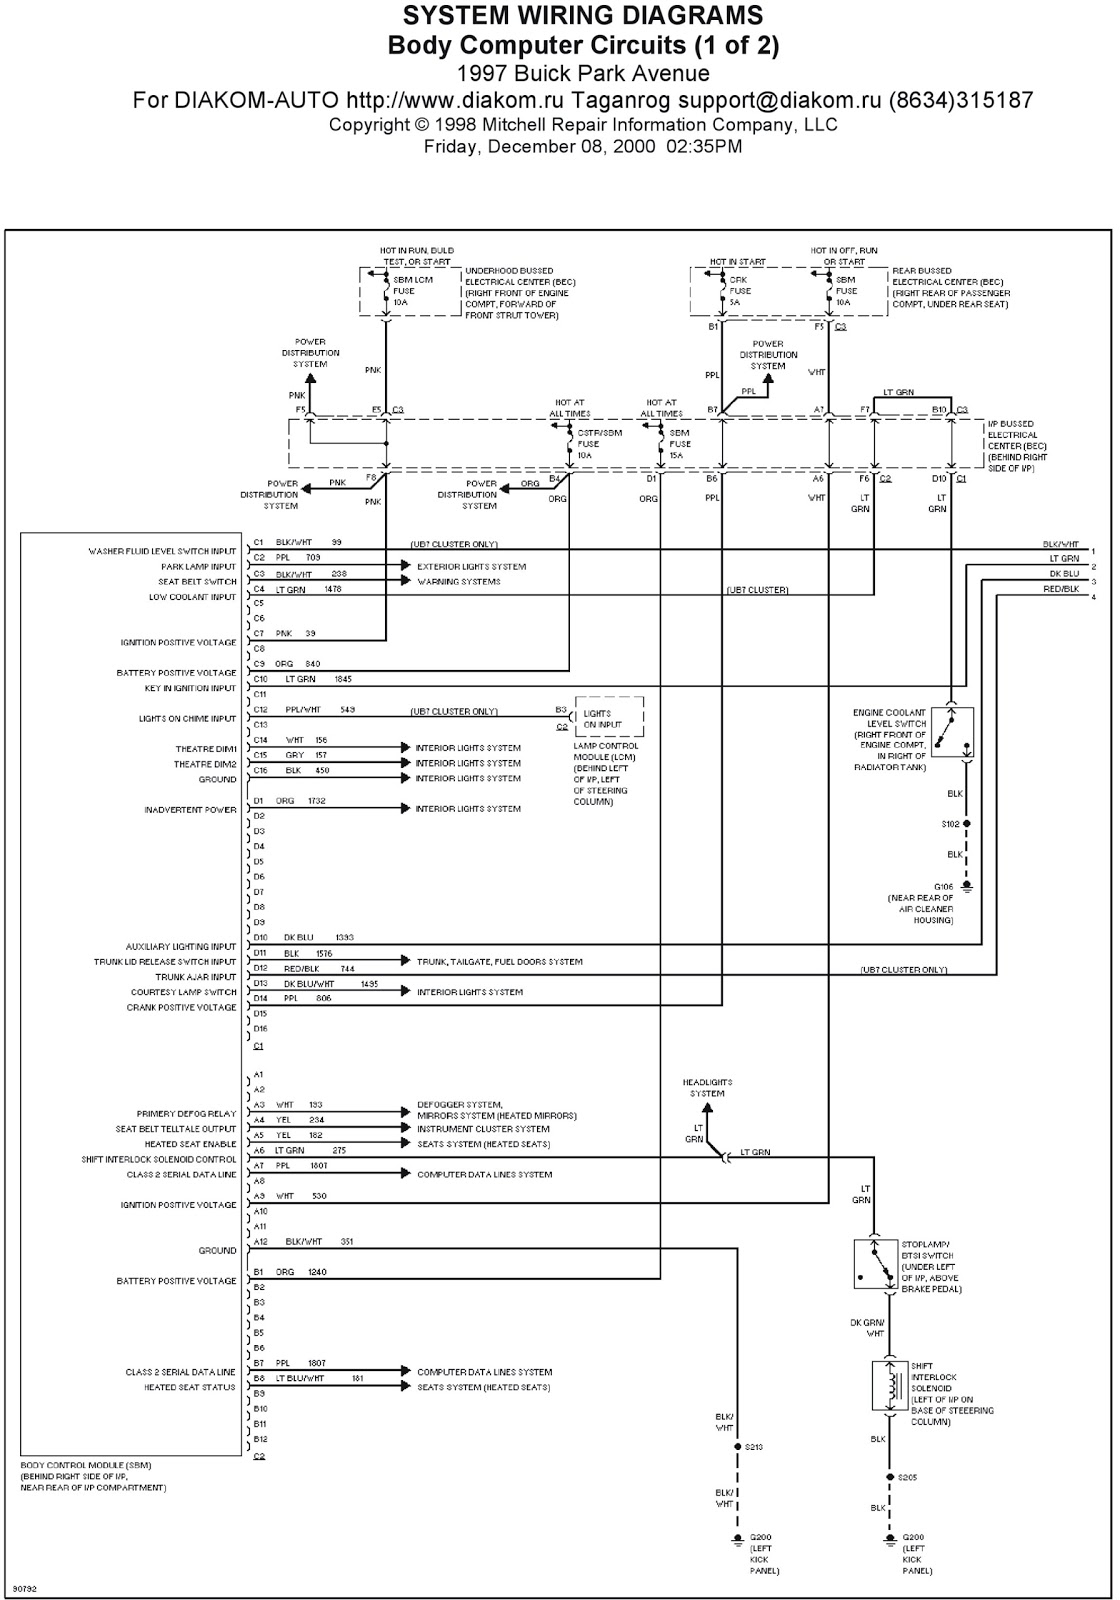 1997 Buick Park Avenue System Wiring Diagrams Body